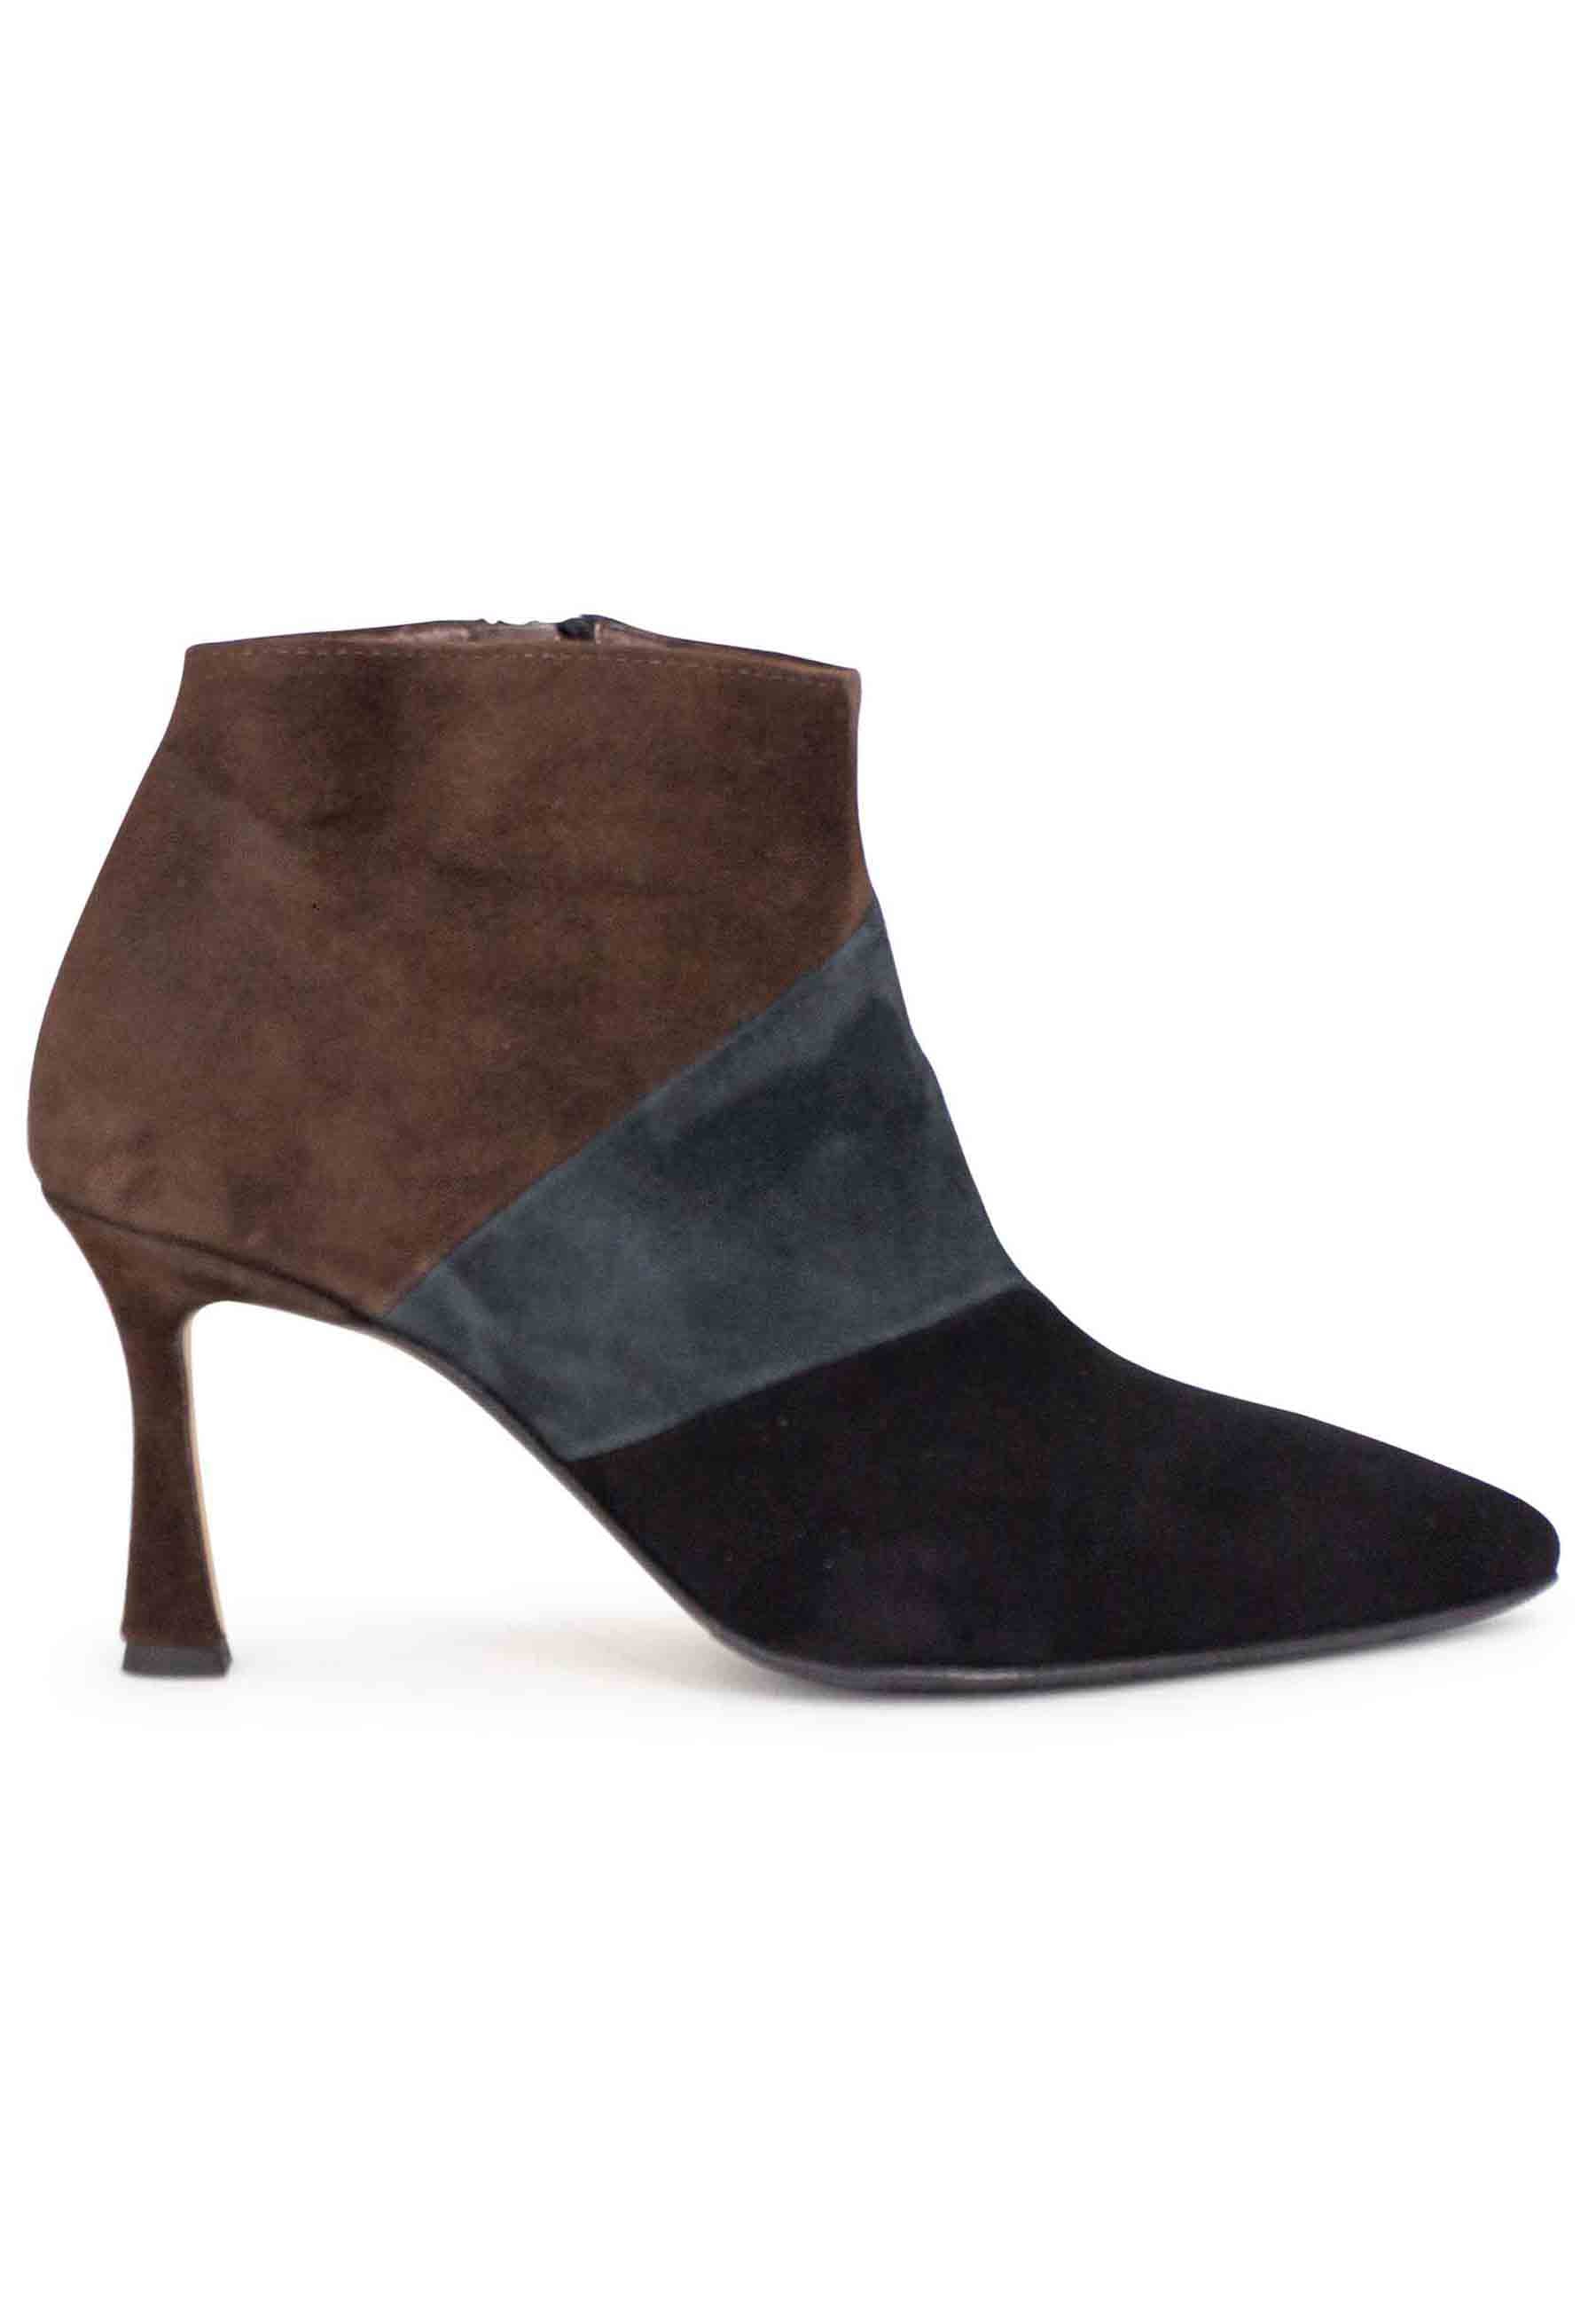 Women's black suede ankle boots with high heel